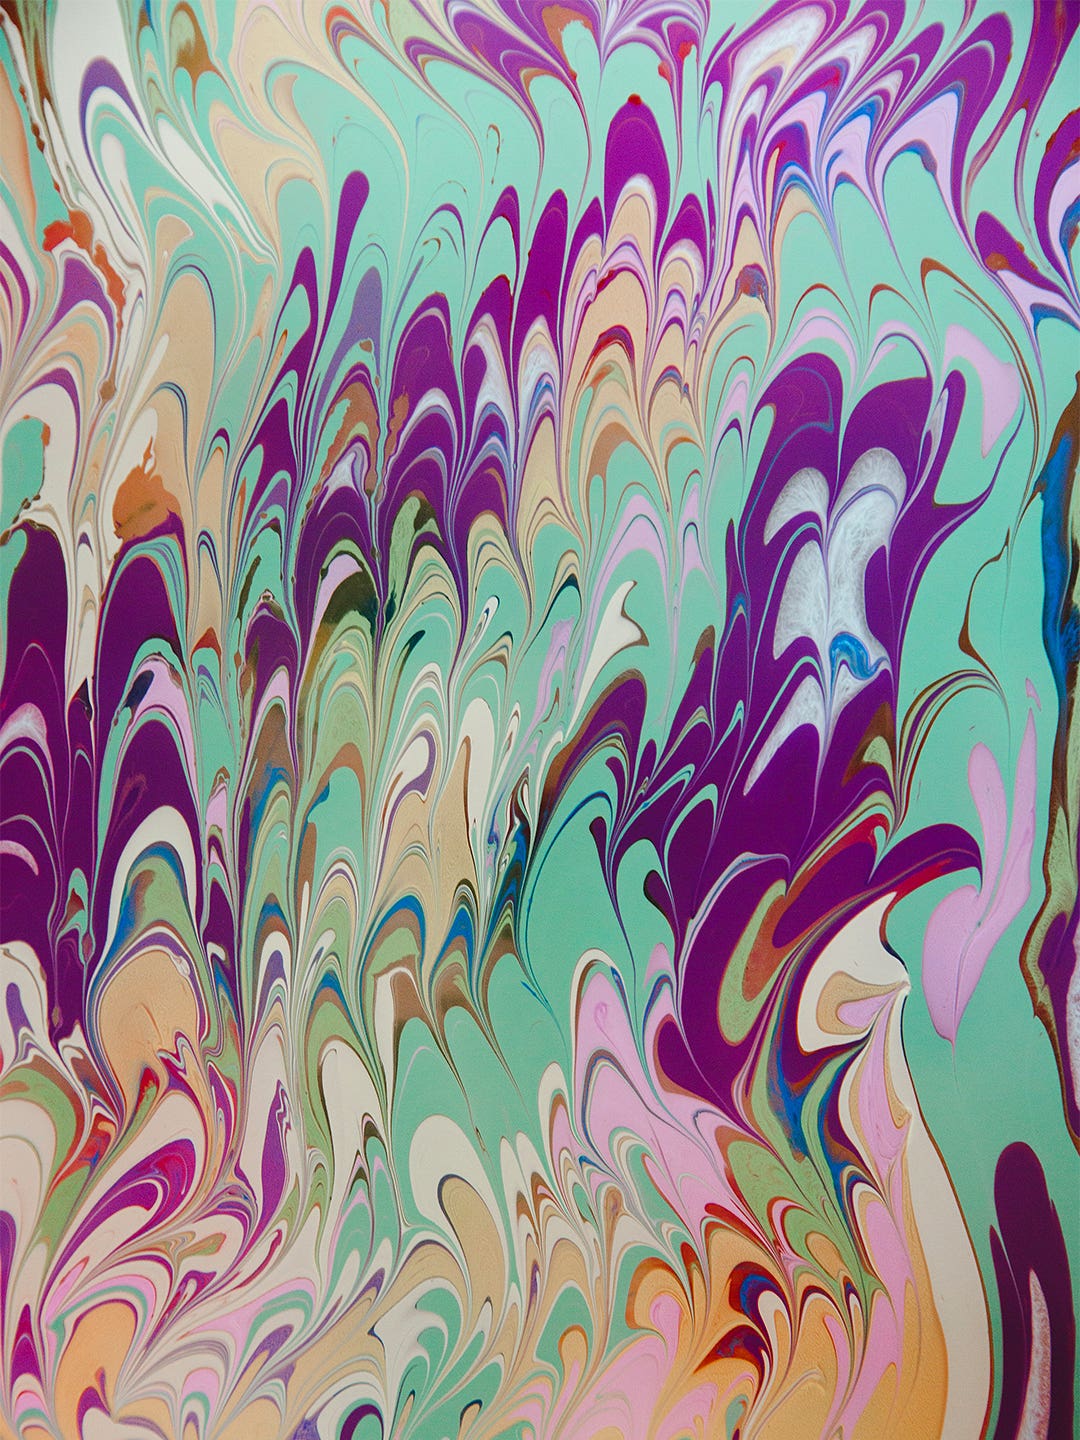 If You Love All Things Tie-Dye, You Need to Try Fabric Marbling